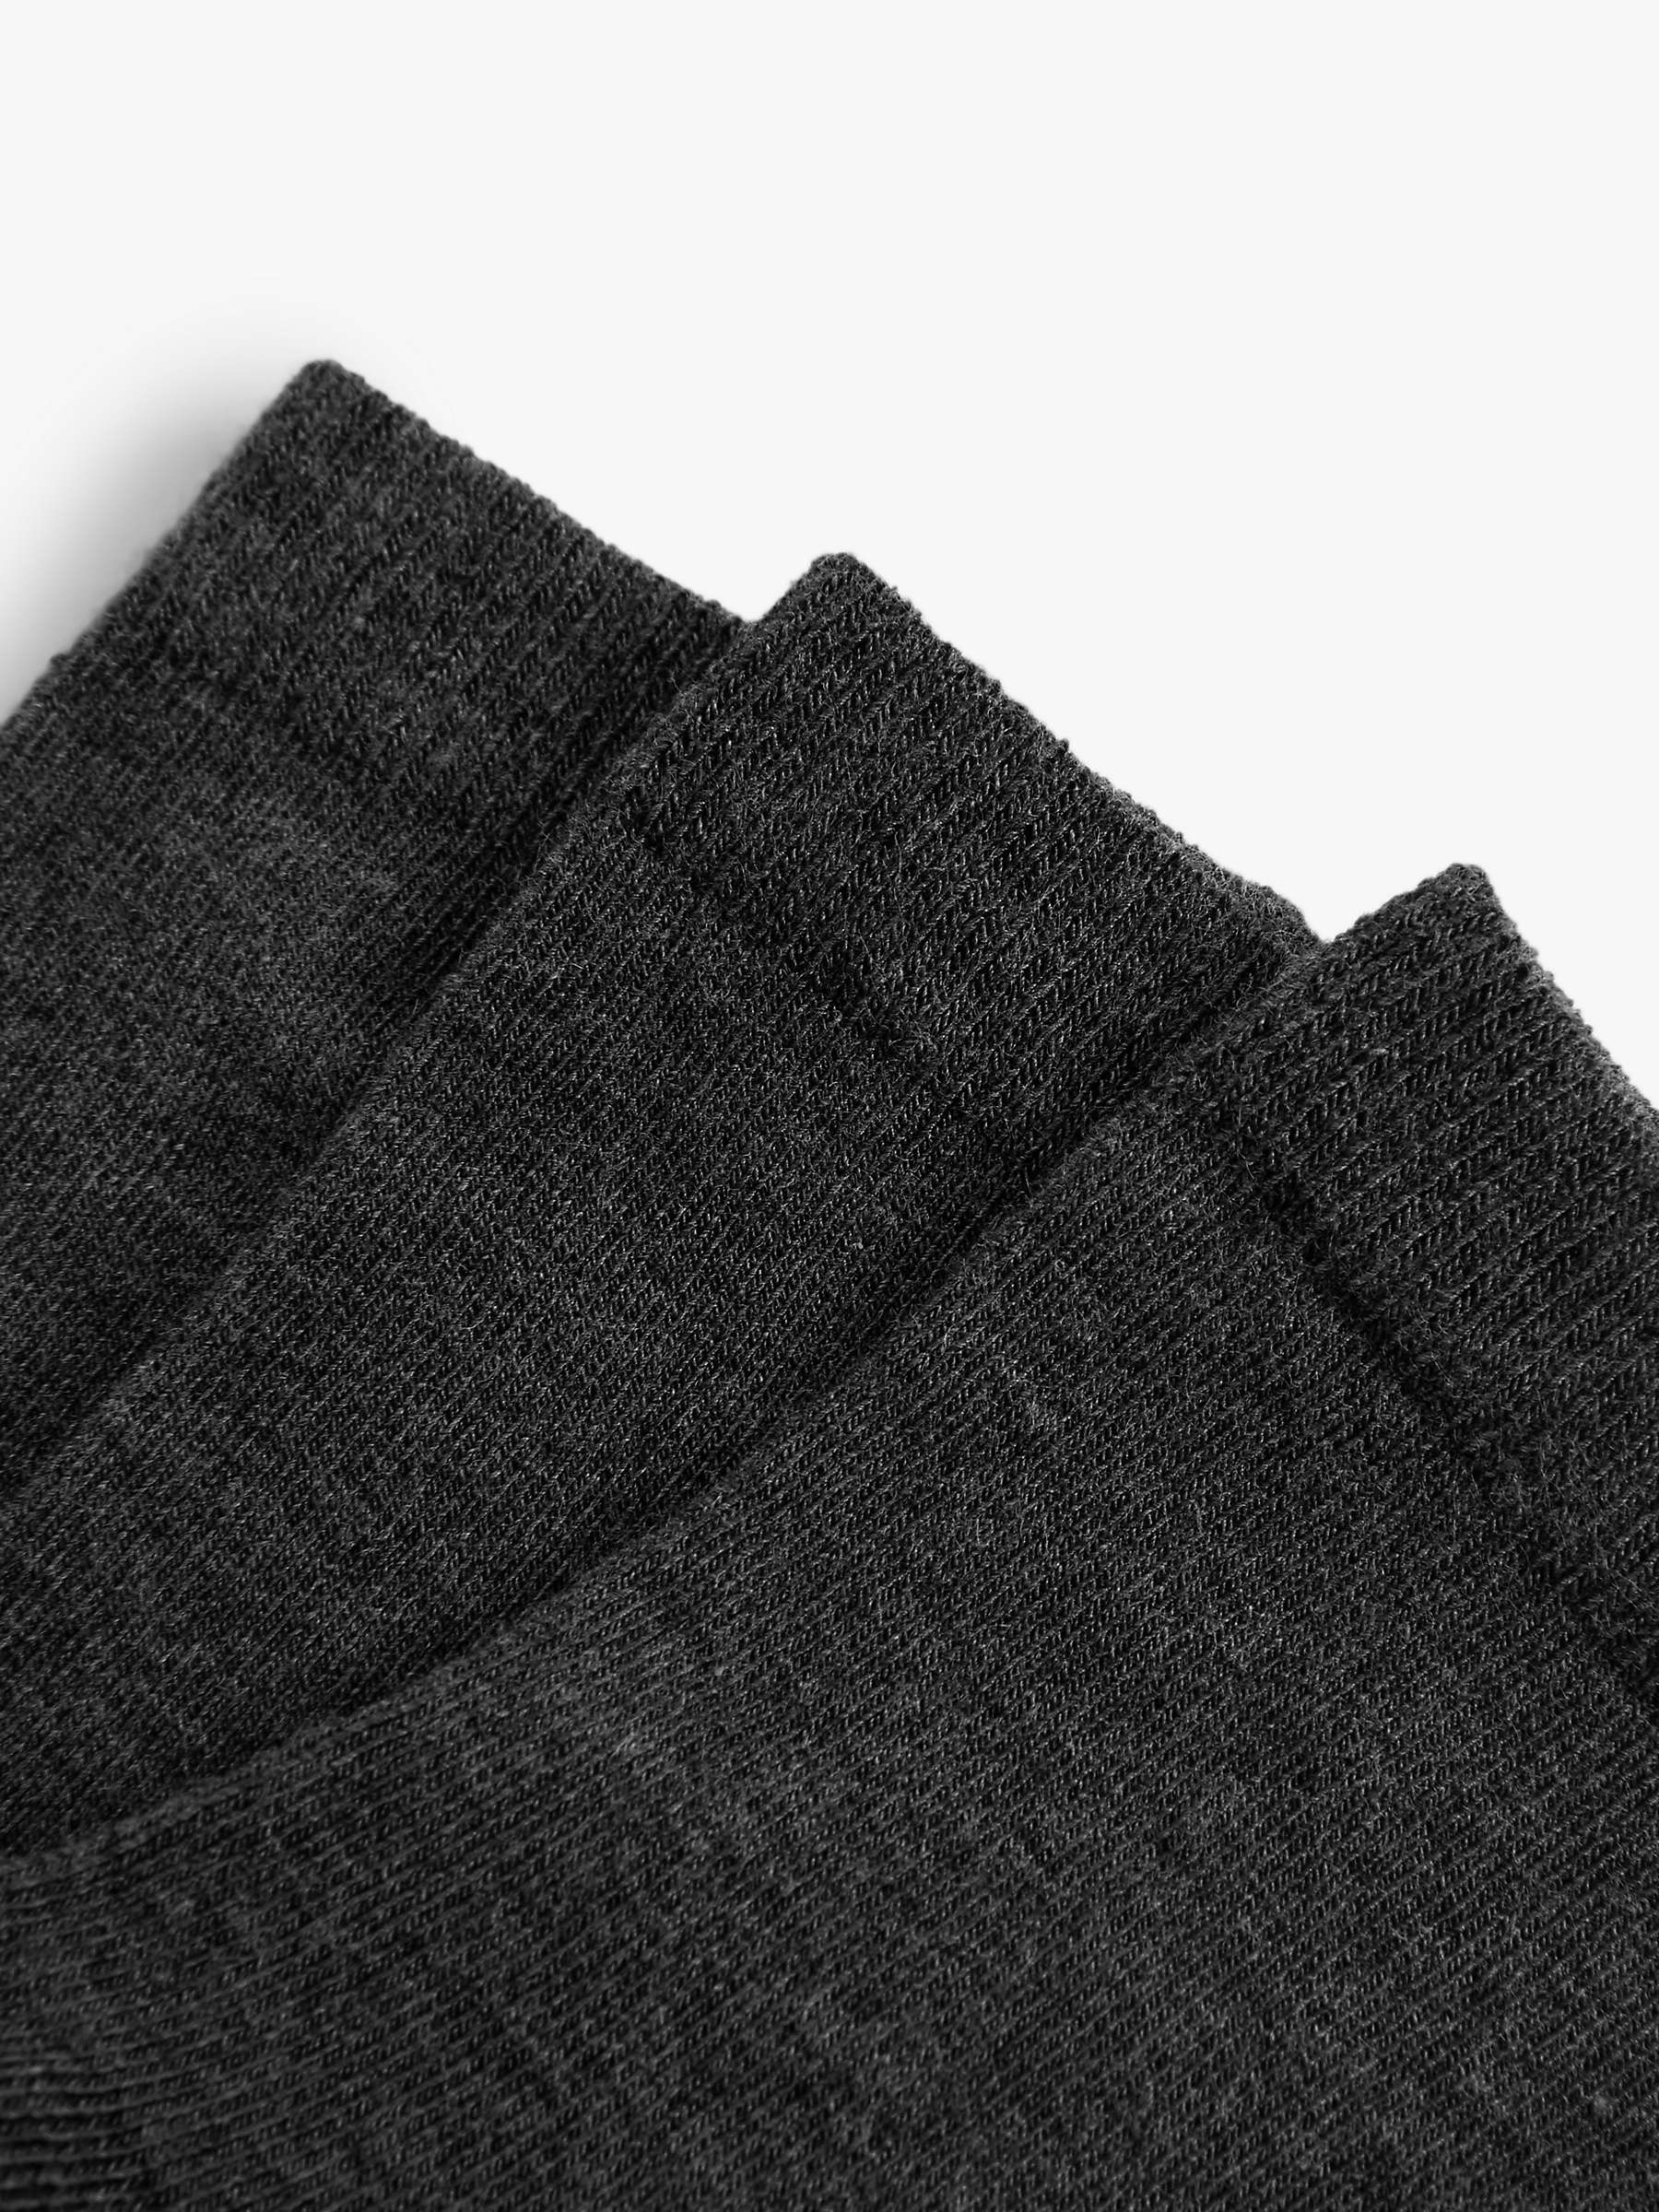 Buy John Lewis Kids' Supersoft Thermal Ankle Socks, Pack of 3, Charcoal Online at johnlewis.com